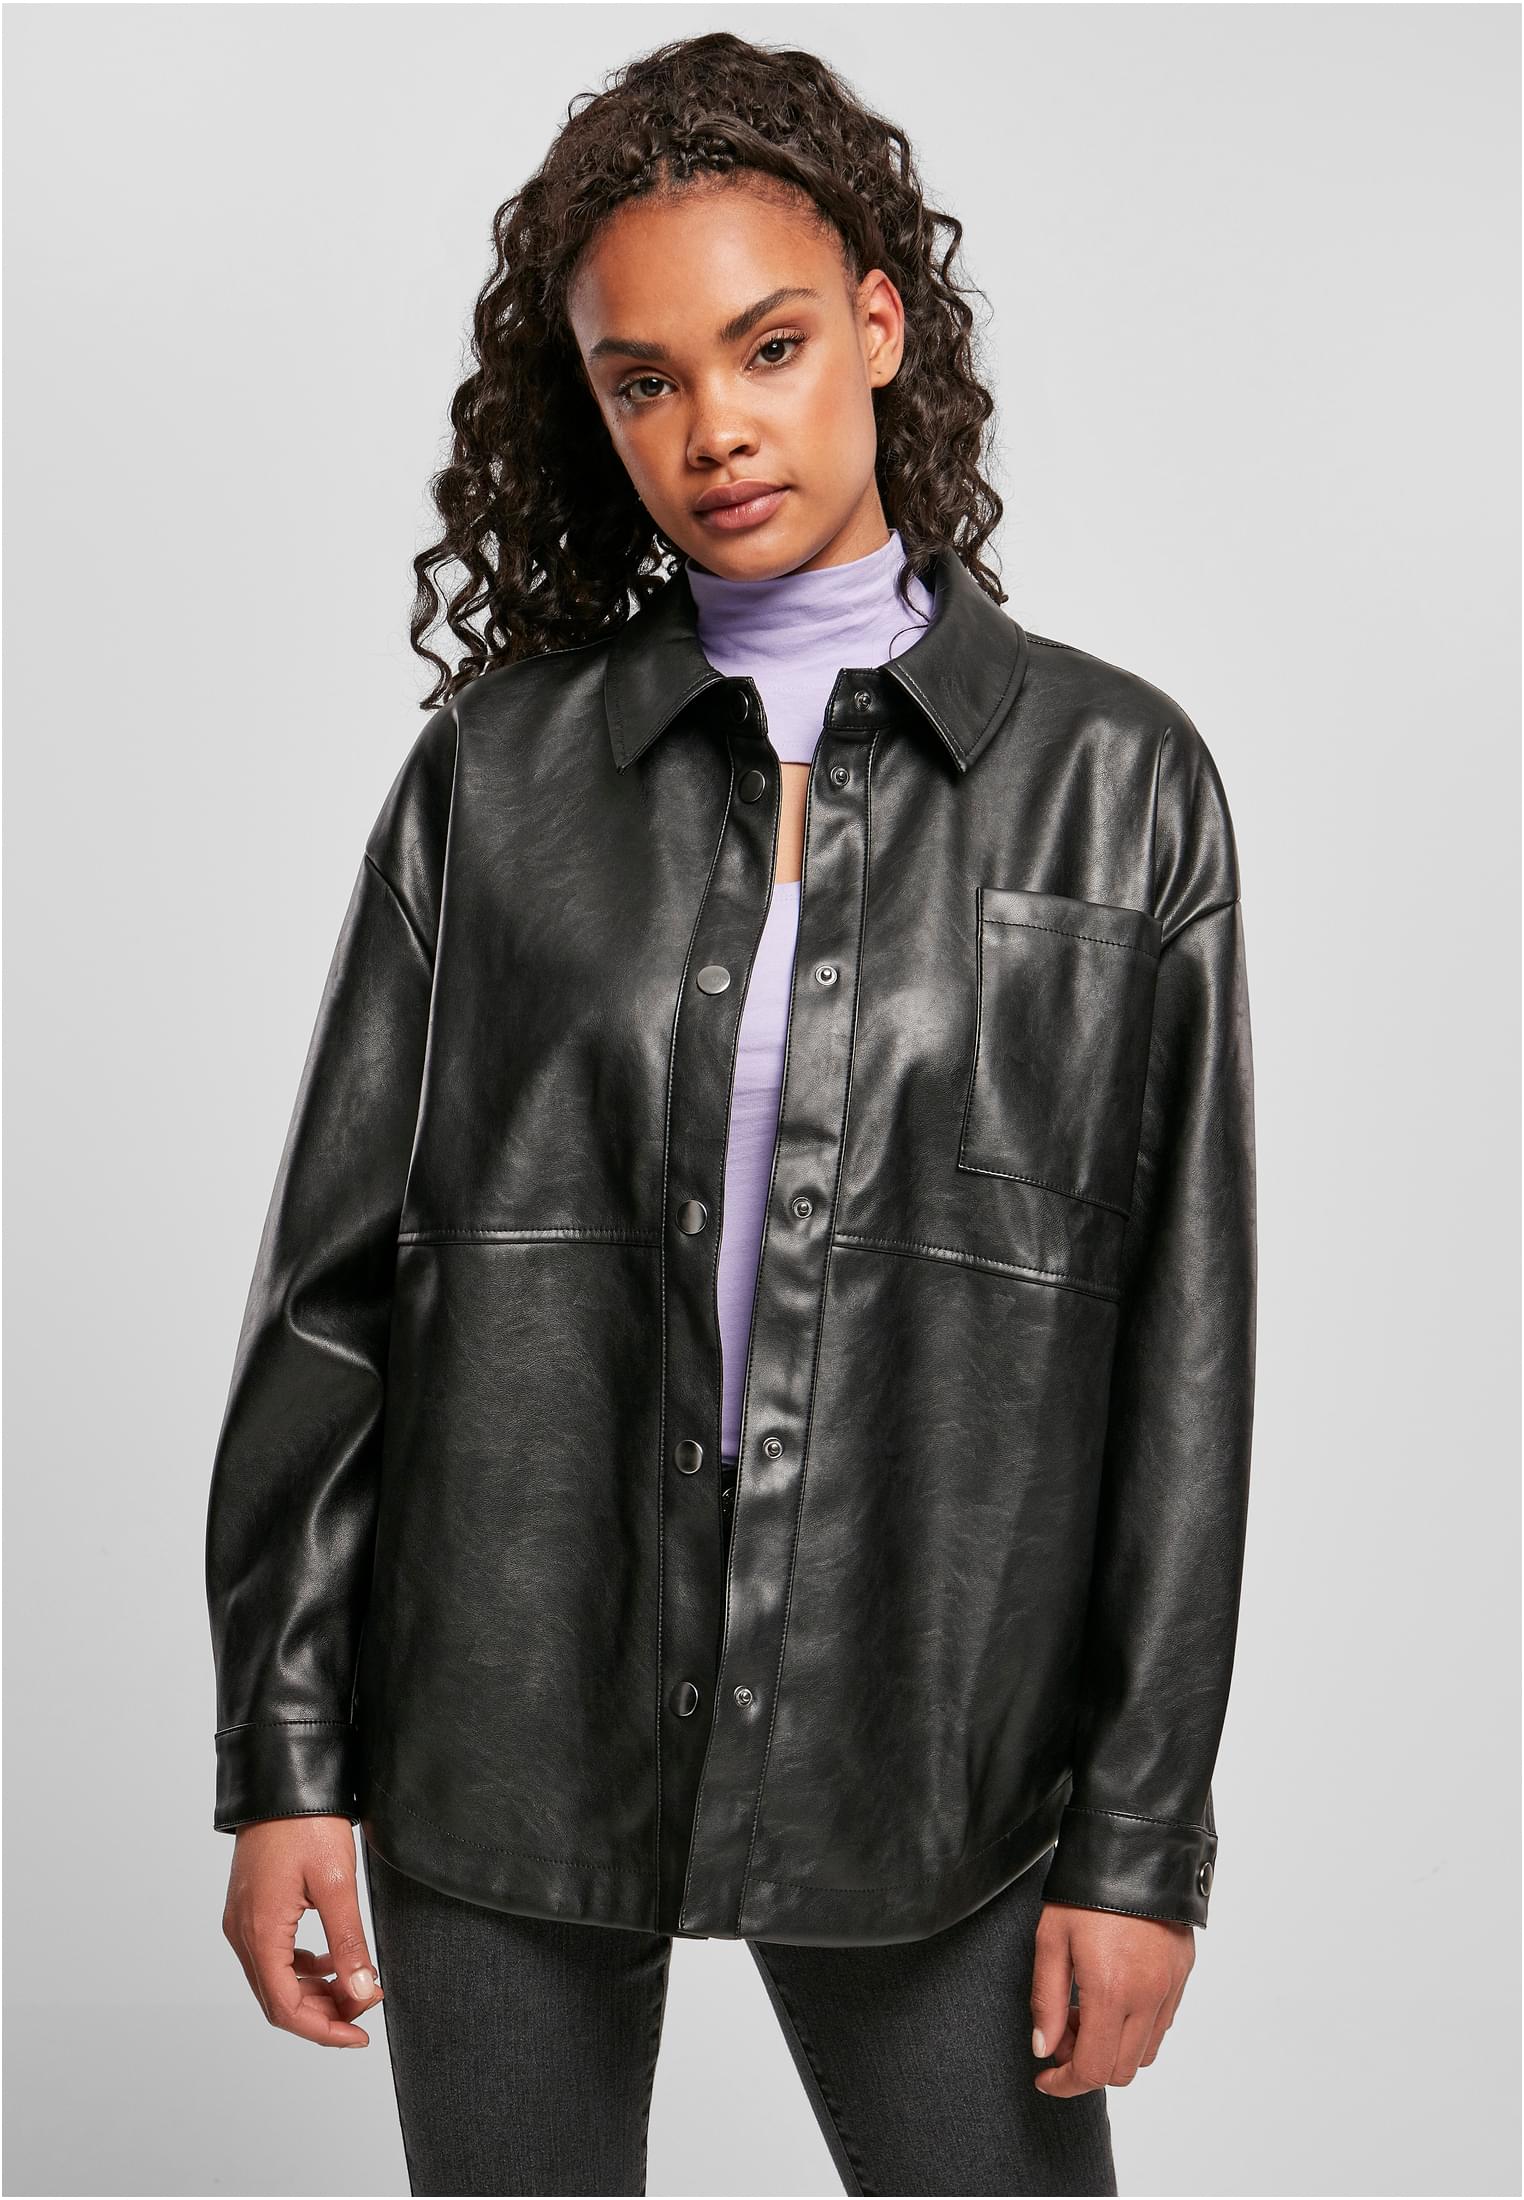 Women's shirt made of black synthetic leather